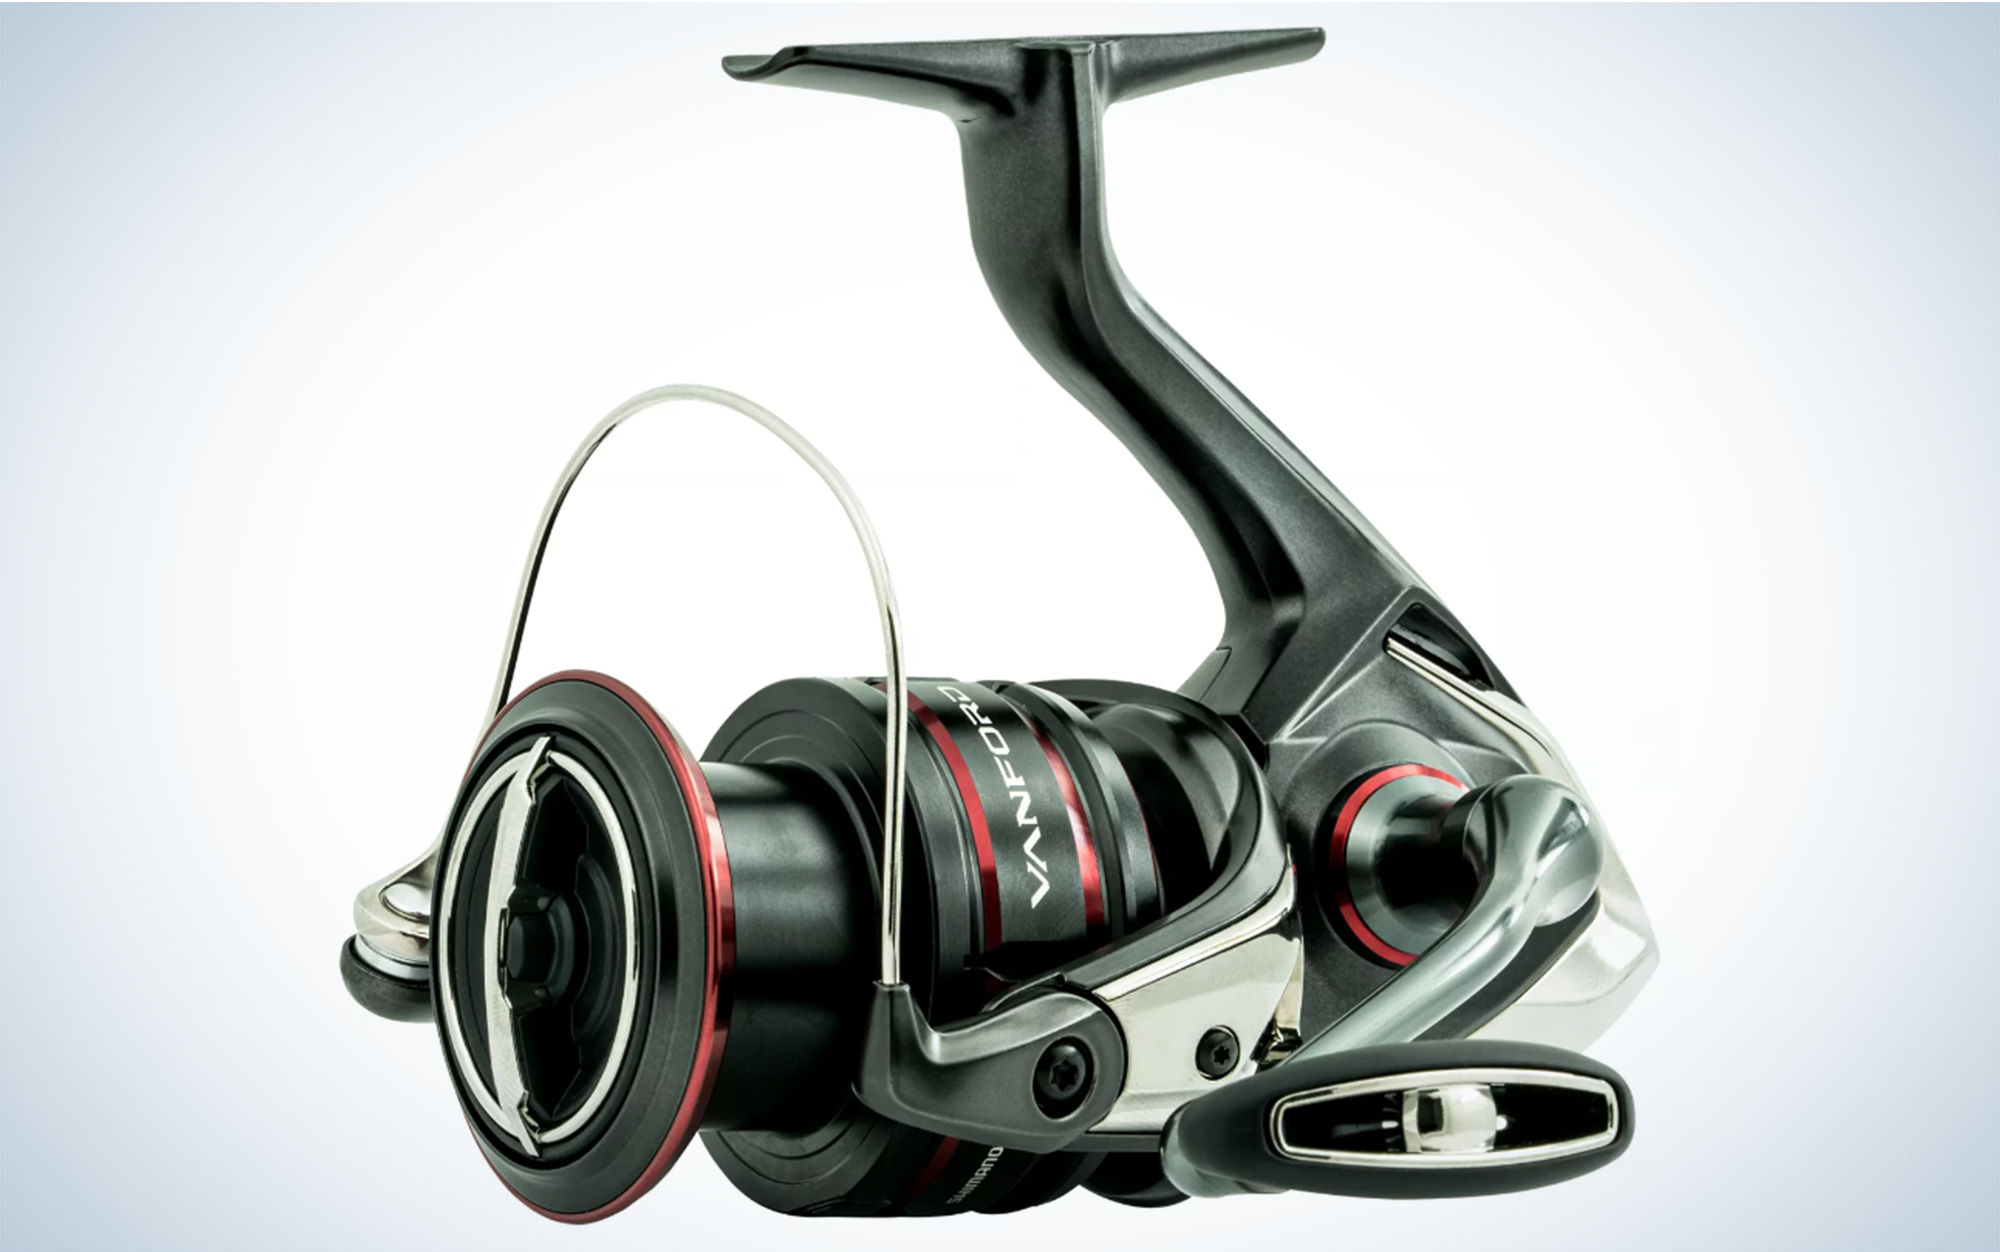 Ultralight 1000 Series Spinning Reel, 5.5:1 Gear Ratio Fishing Reels  Conventional for Freshwater and Saltwater Fishing